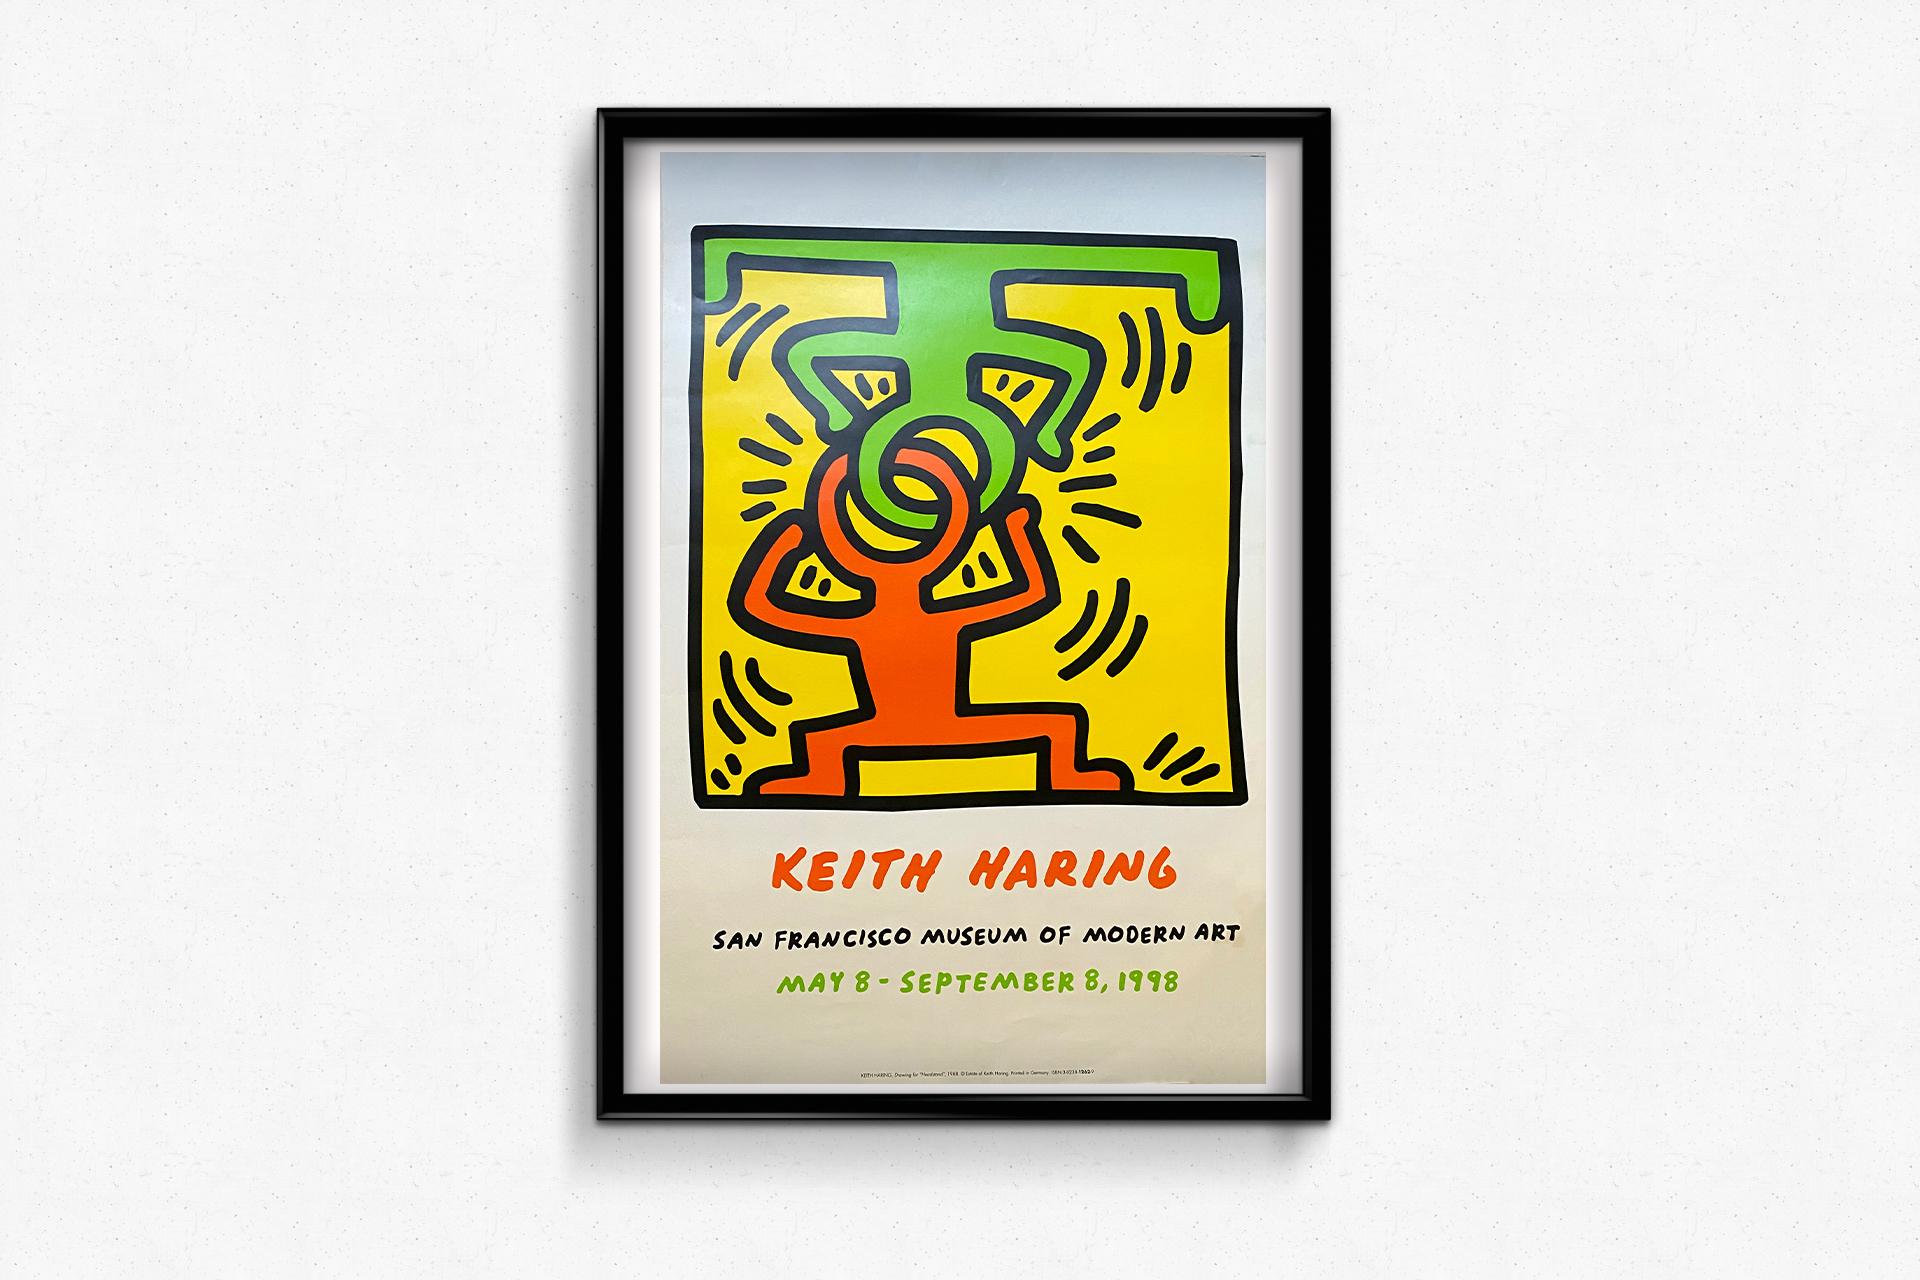 Poster for Keith Haring's exhibition at the San Francisco Museum of Modern Art in 1998. 

Keith Allen Haring was an American artist whose pop art emerged from the New York City graffiti subculture of the 1980s. His animated imagery has 